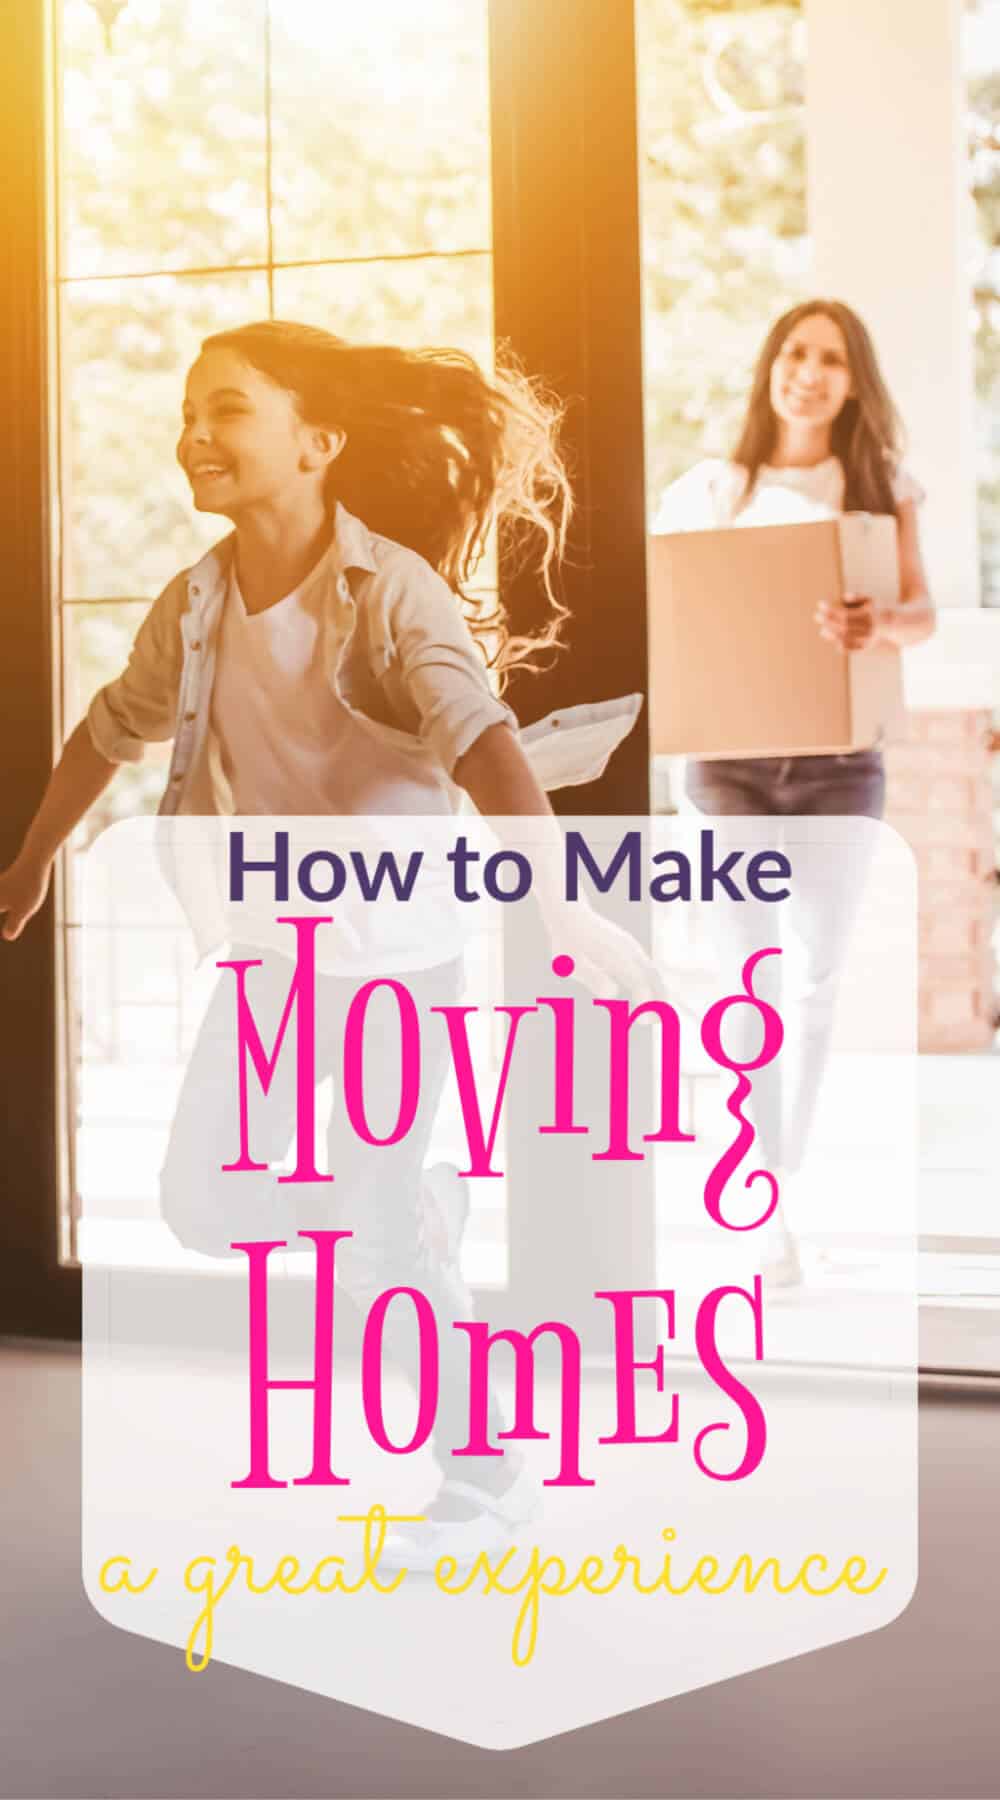 Moving homes is a stressful time for families, but you can do a few things to make it easier. Yes, moving to a new house can actually be a good time!